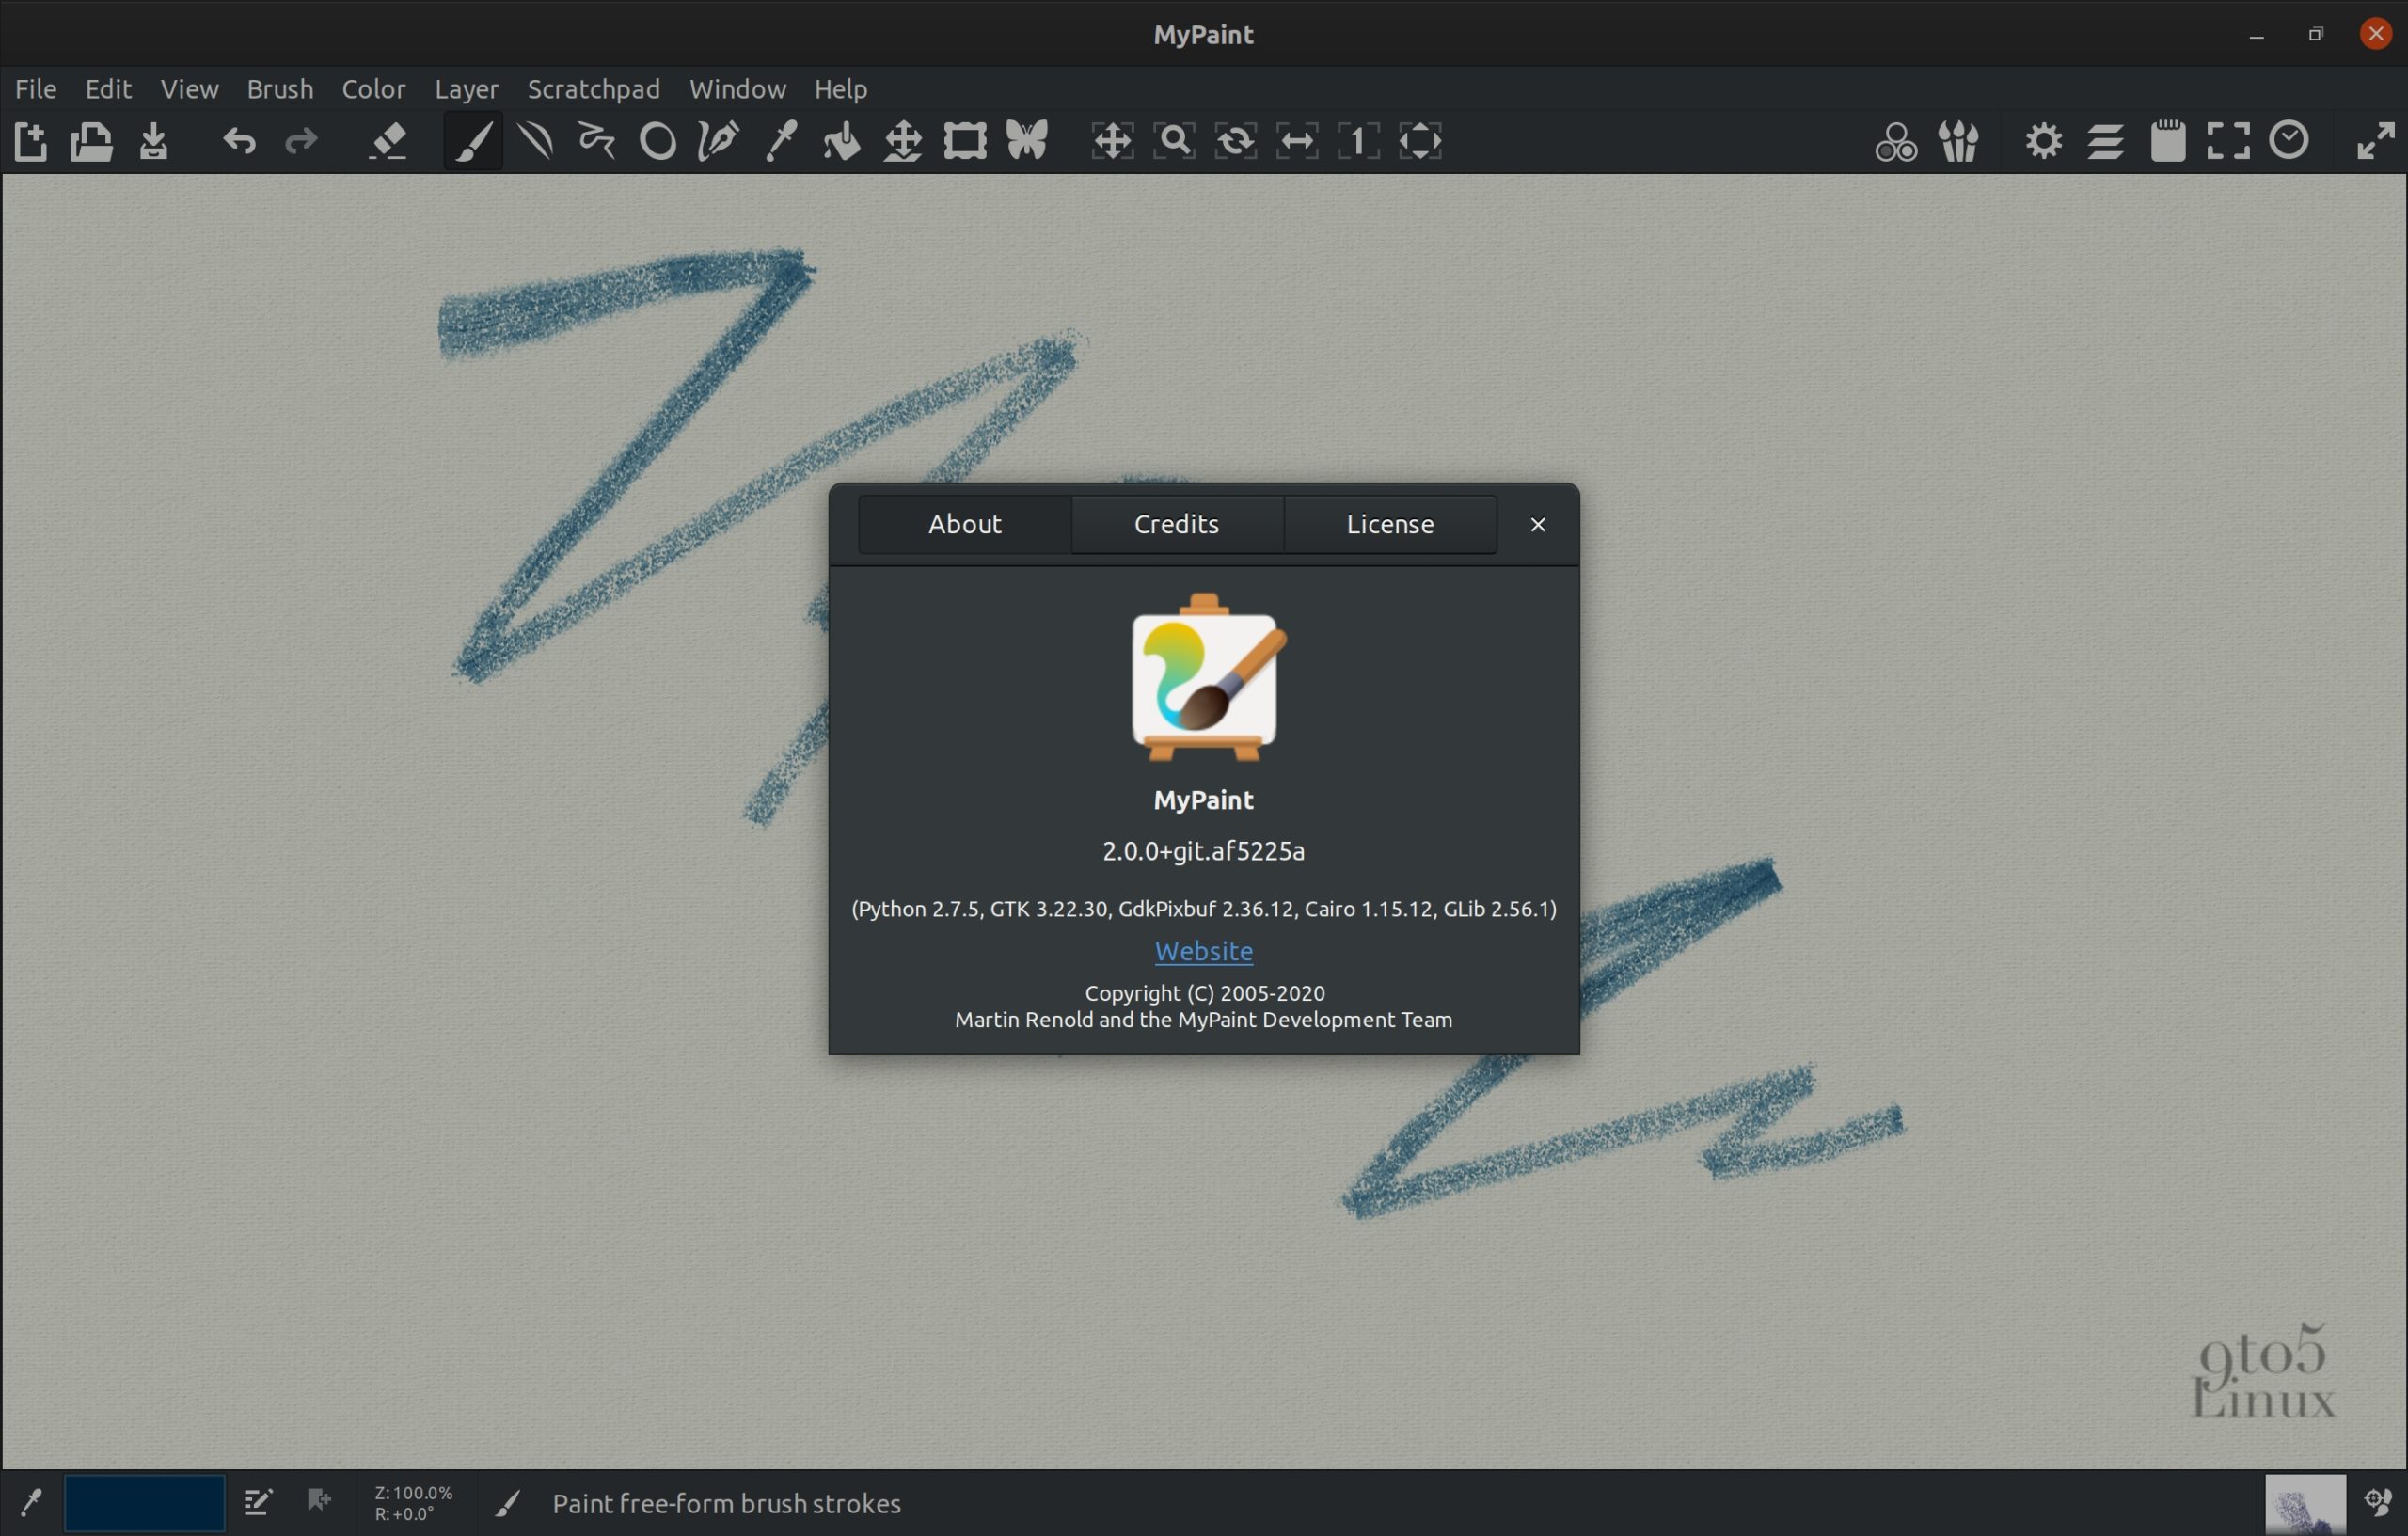 MyPaint 2.0 Open-Source Drawing and Paining App Adds Major New Features